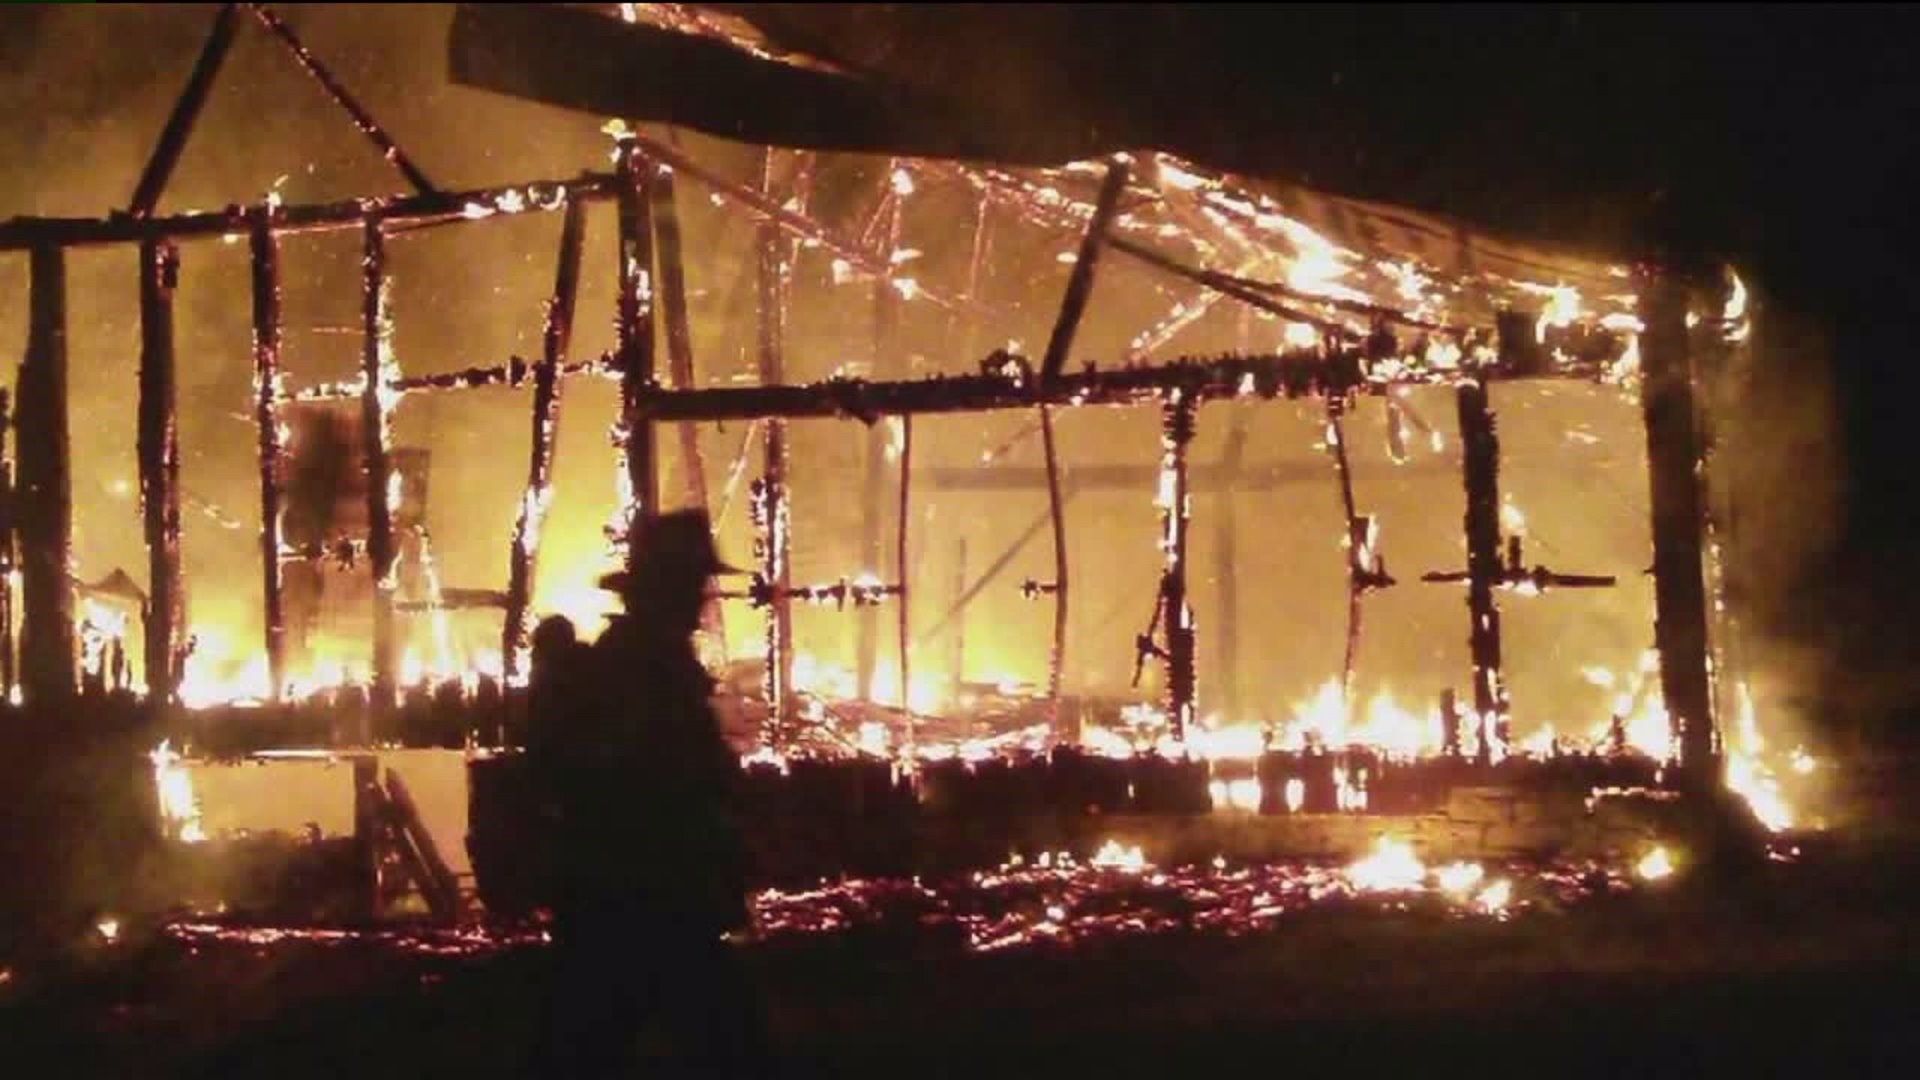 Fire Guts Barn in Northumberland County